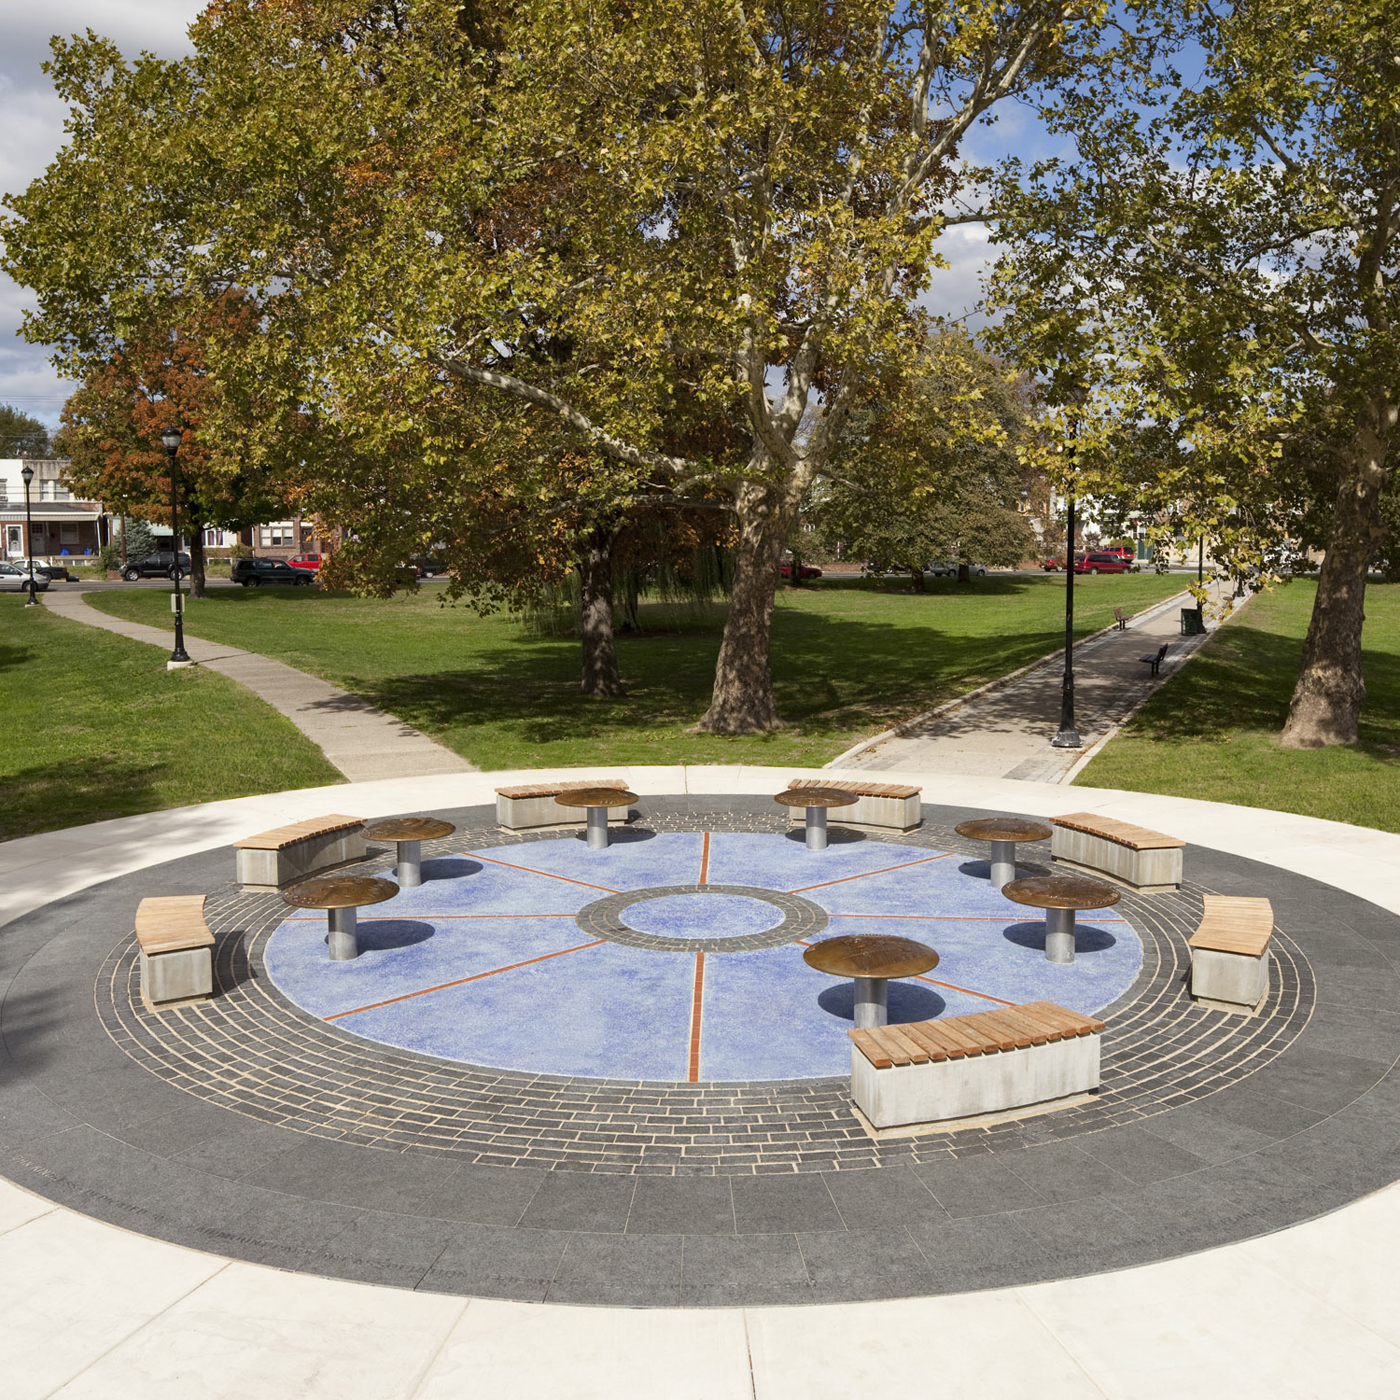 The memorial includes seven bronze tables that bear the image of labor leaders, organizations, and workers. 